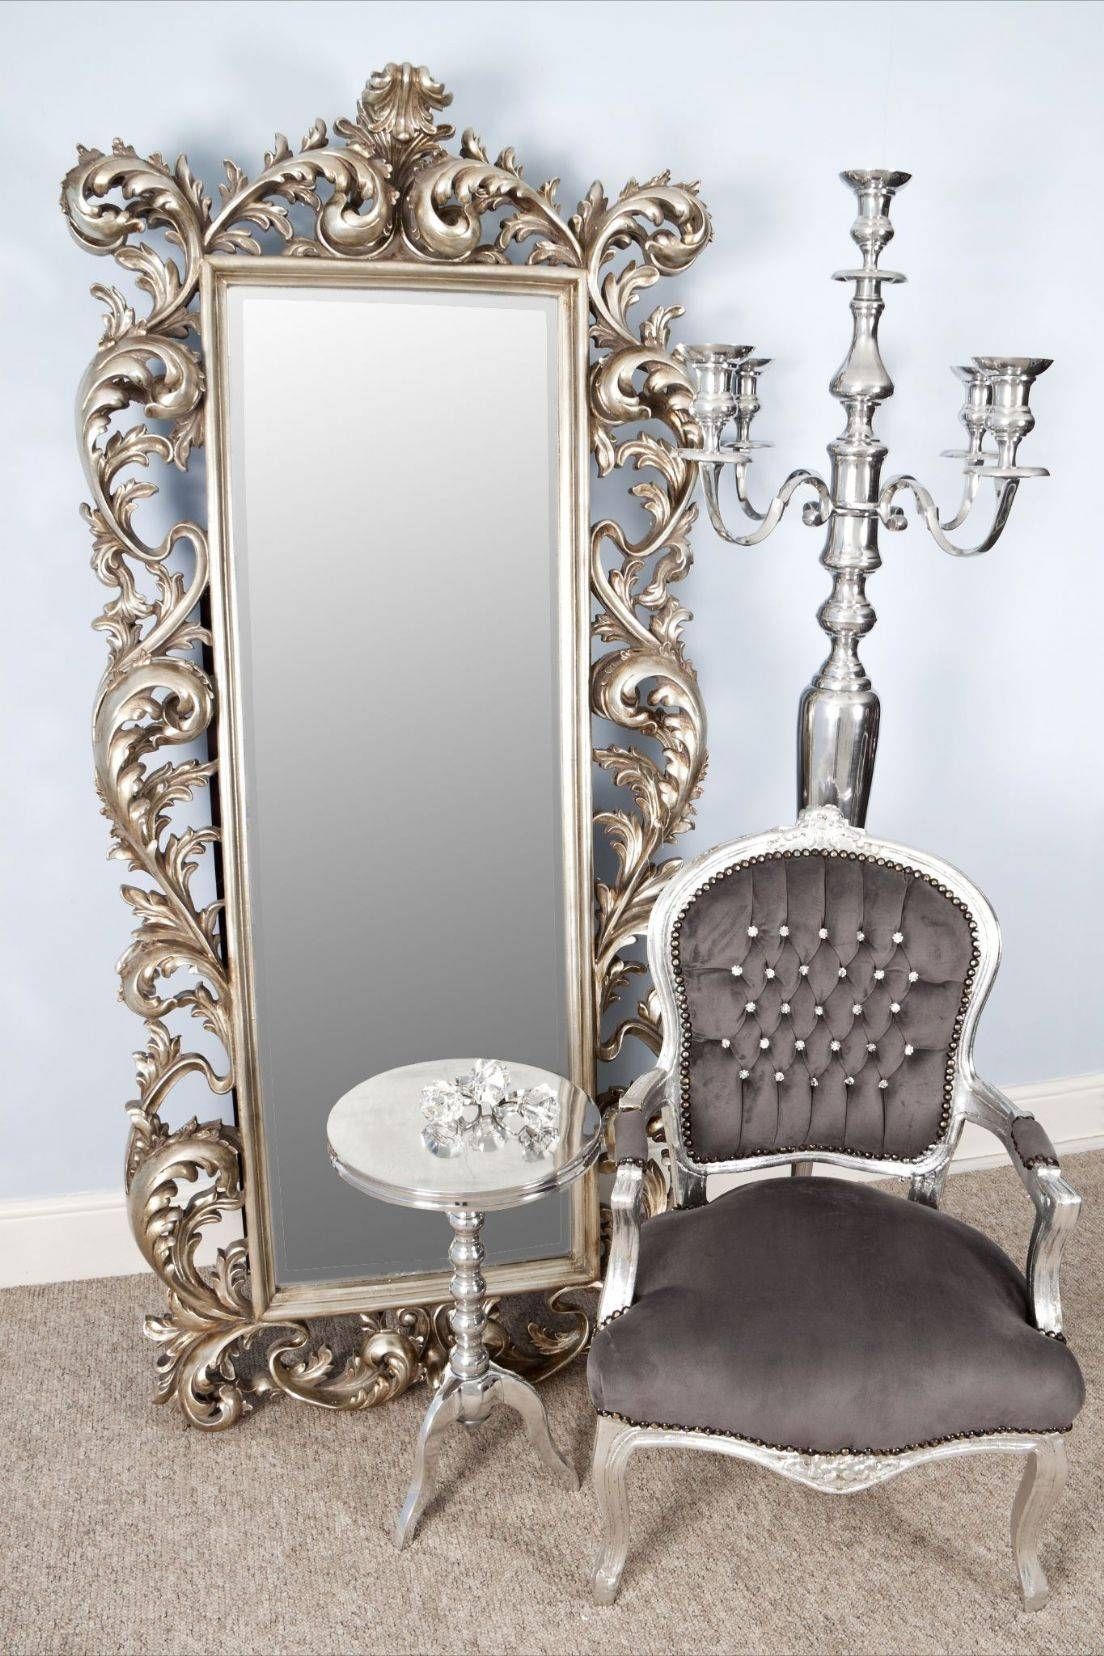 Ornate Mirrors For Sale 23 Beautiful Decoration Also Zoom In Large Ornate Mirrors (View 12 of 25)